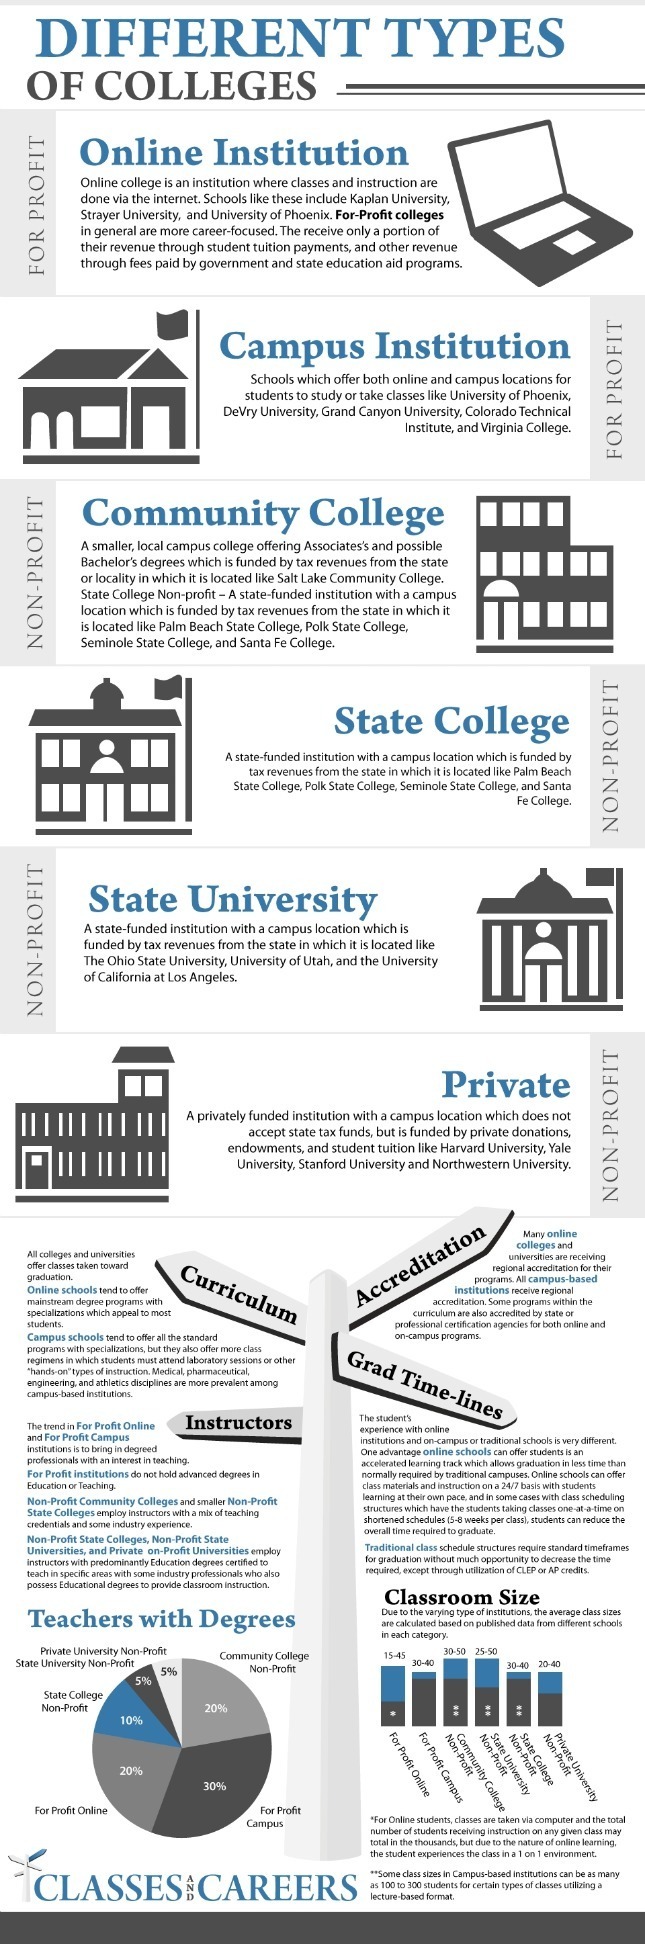 Different Types of Colleges Infographic